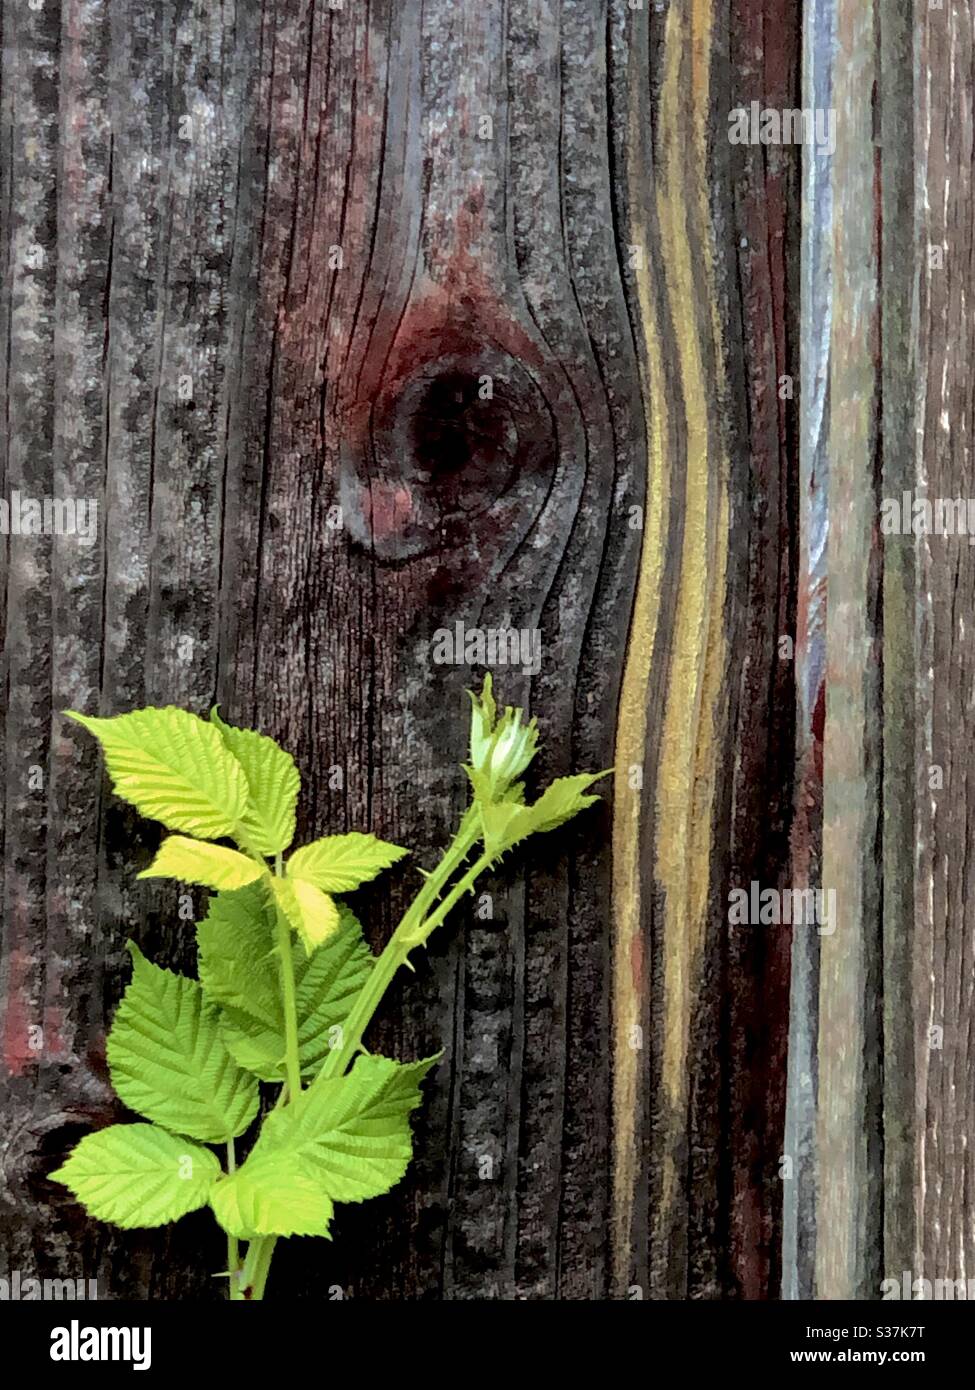 Spiky vine crawling on an old rustic wooden board Stock Photo